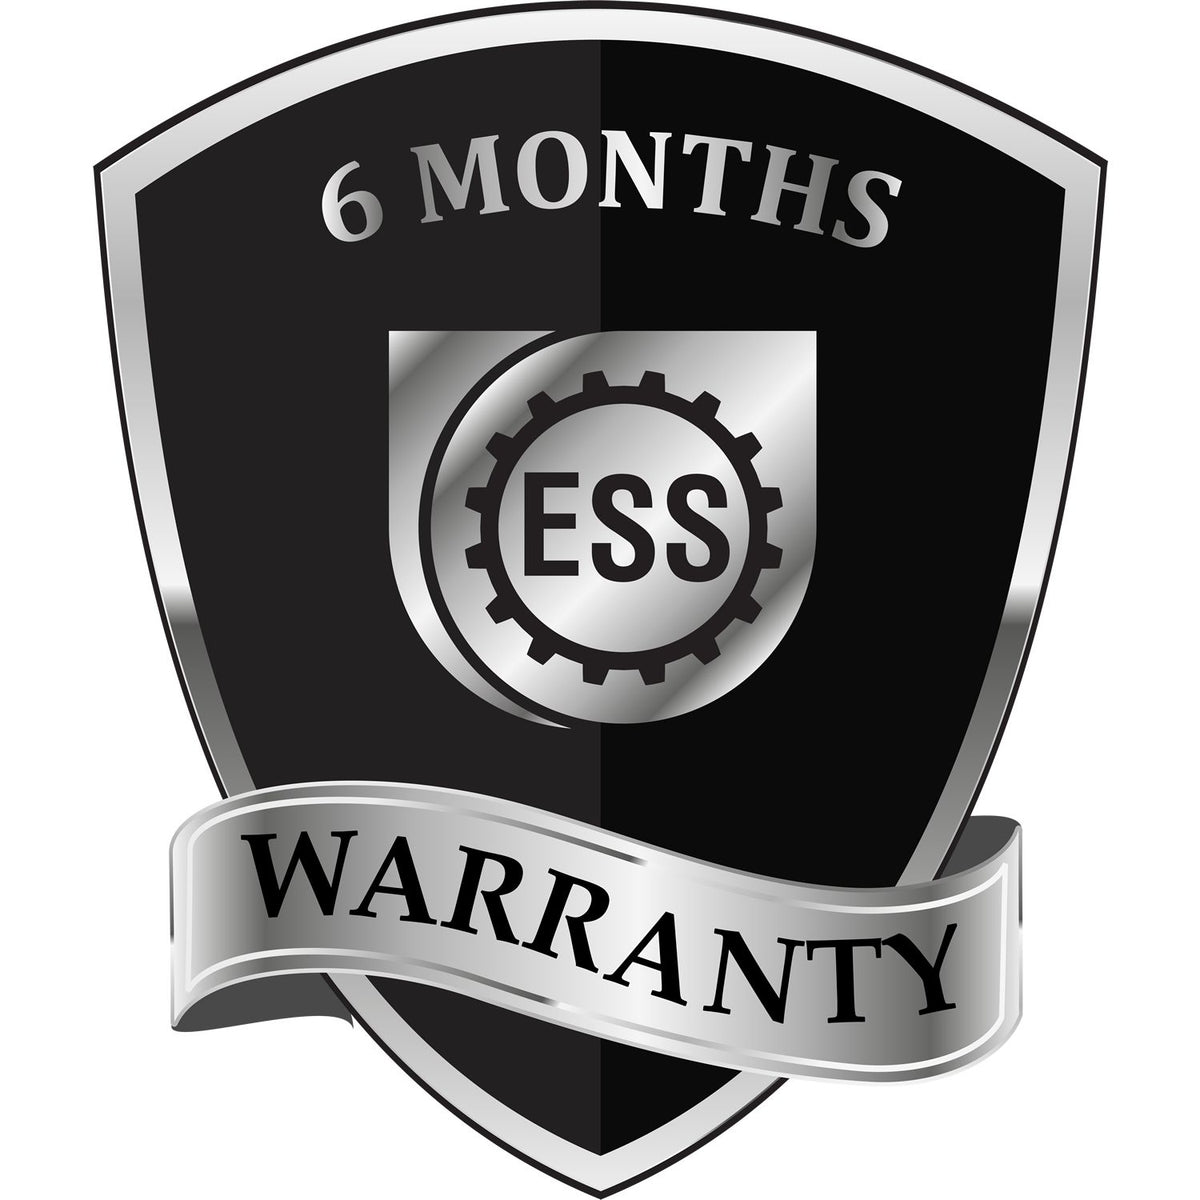 Large Narrow Font Insurance Verified Rubber Stamp 4935R 6 Month Warranty